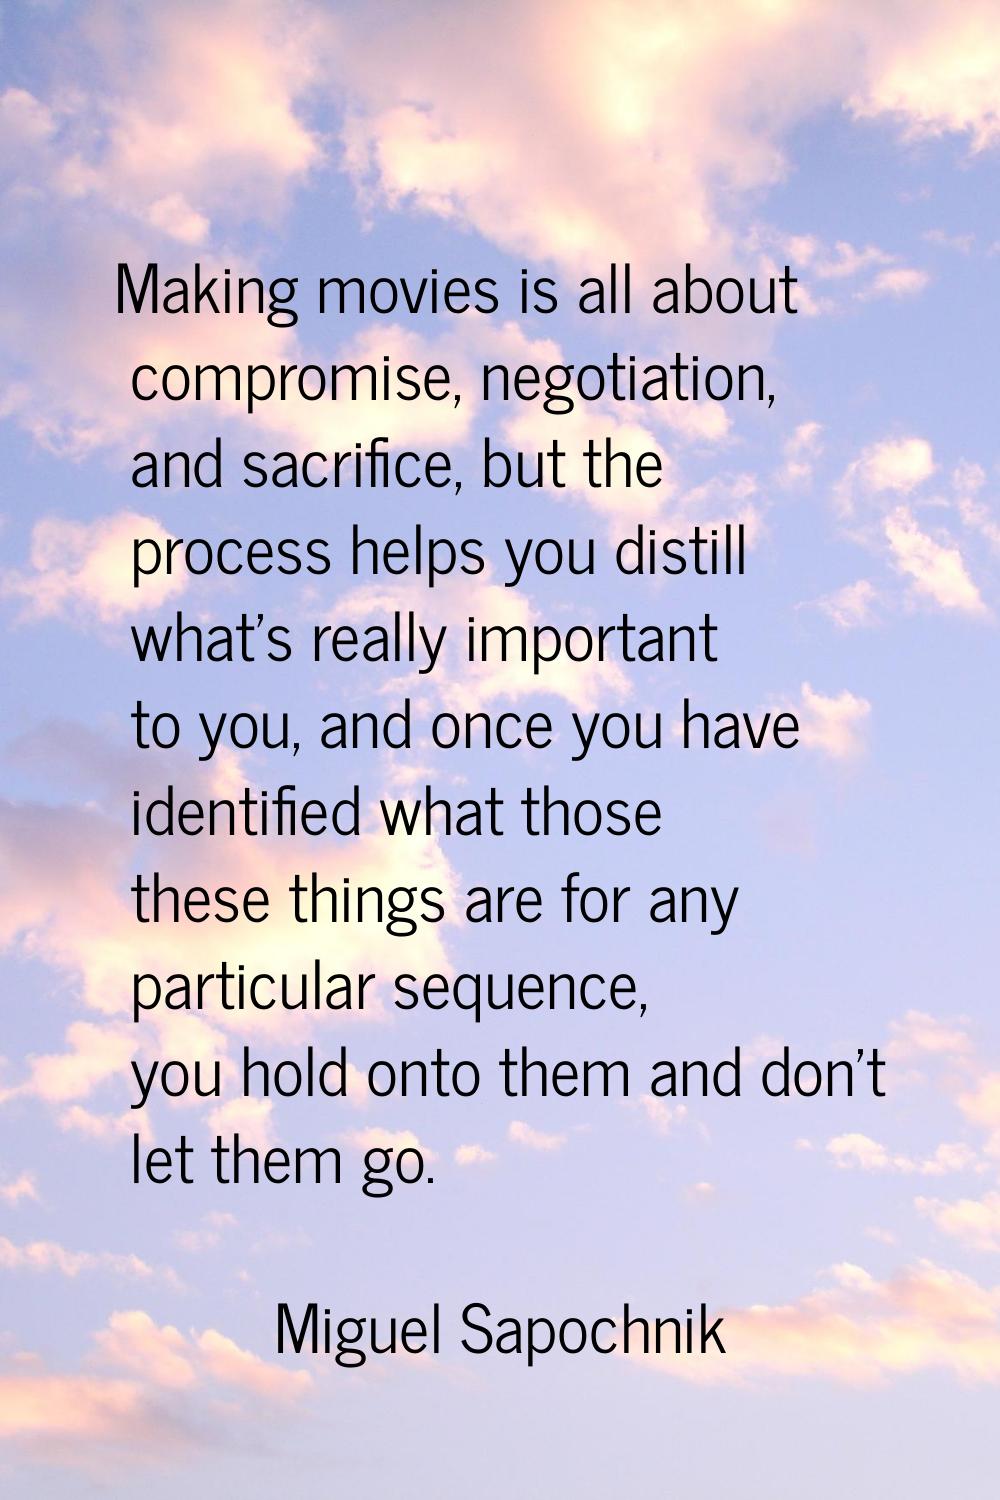 Making movies is all about compromise, negotiation, and sacrifice, but the process helps you distil